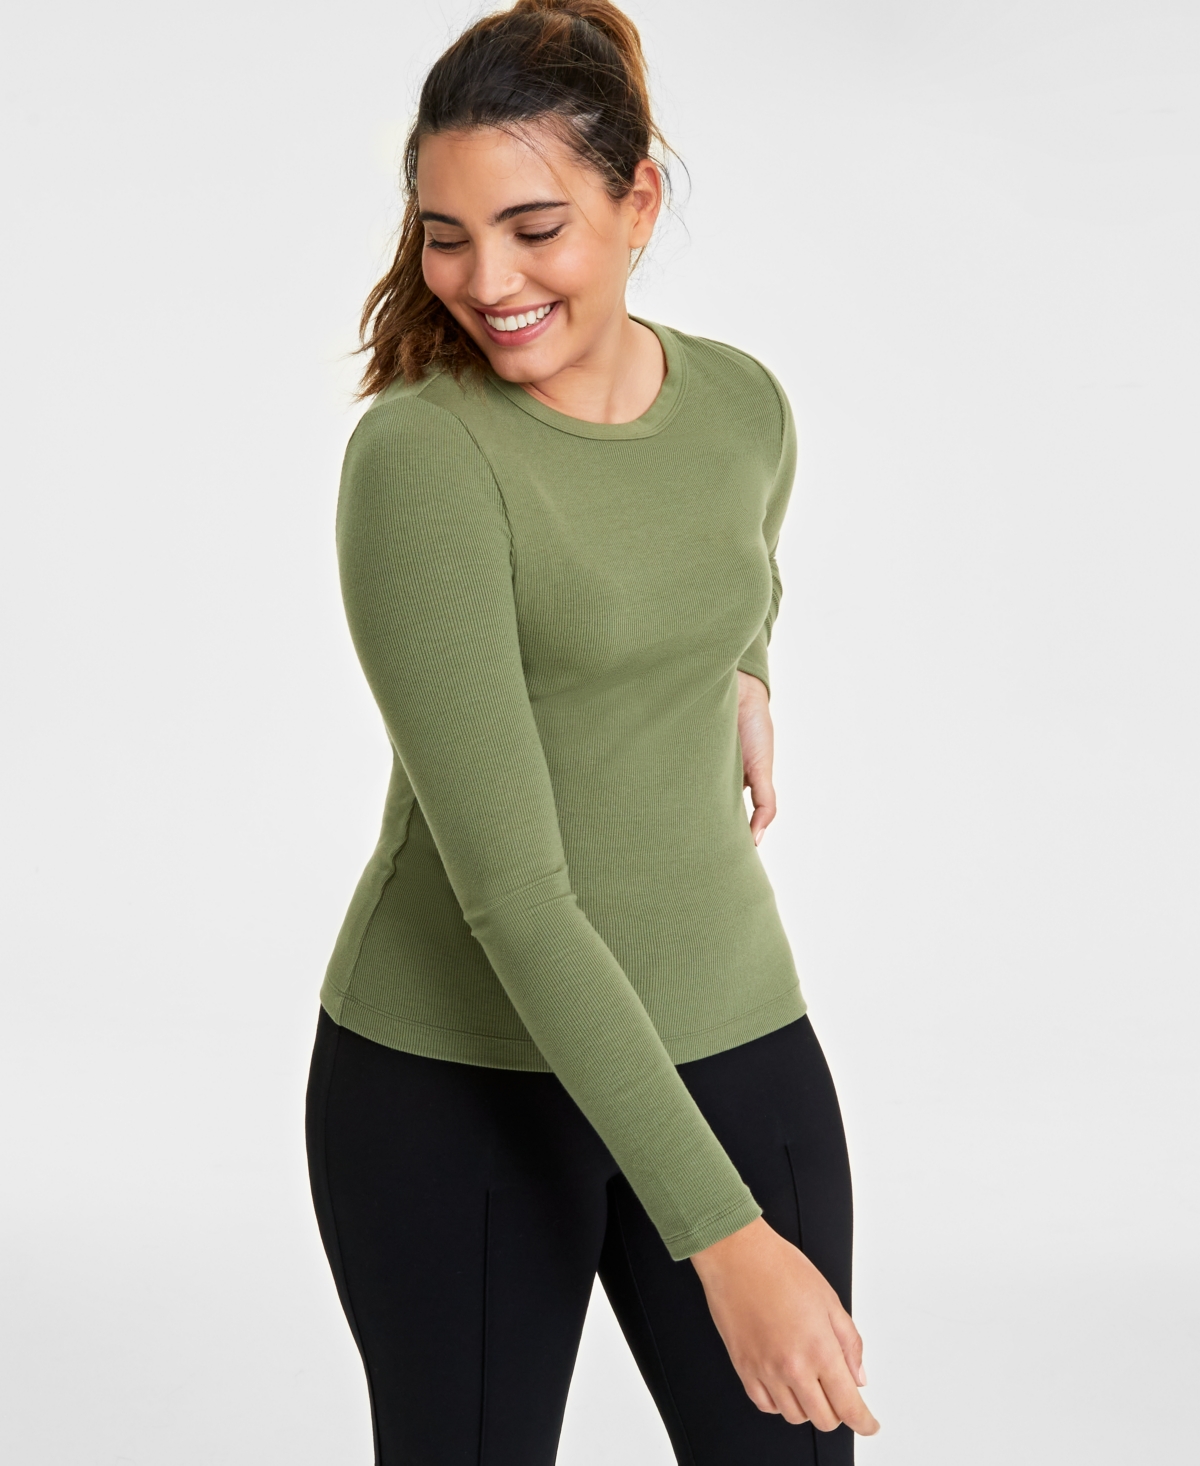 Women's Ribbed Long-Sleeve Crewneck Top, Created for Macy's - Neptune Beso